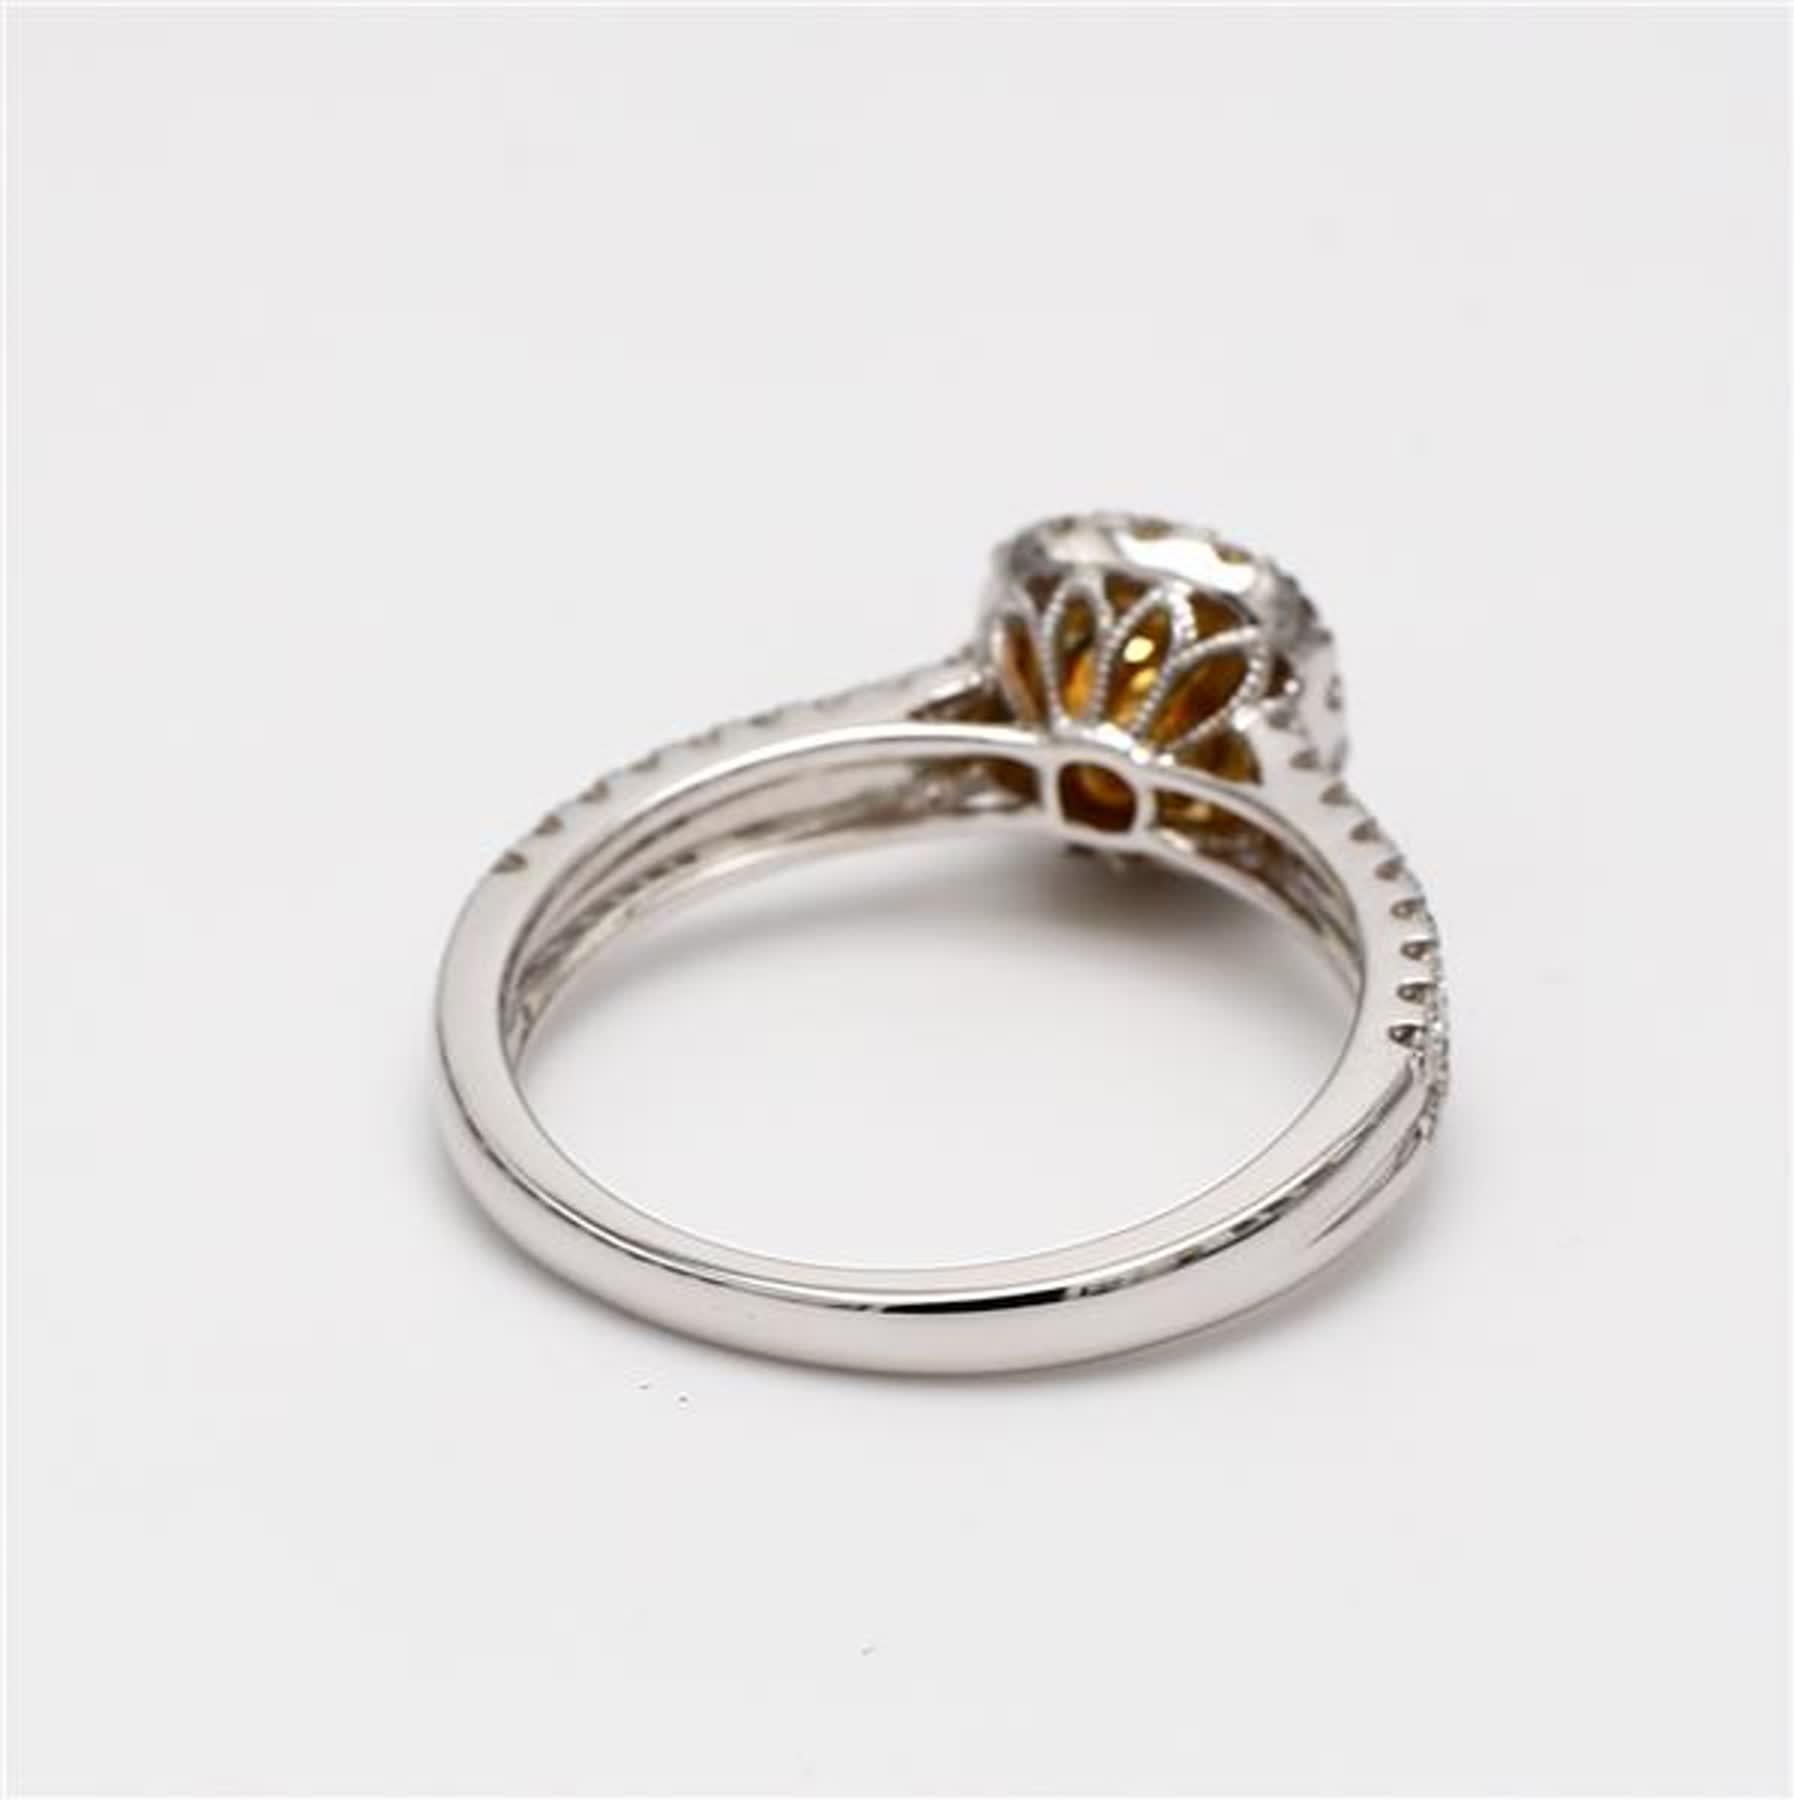 Contemporary Natural Yellow Cushion and White Diamond 1.11 Carat TW Gold Cocktail Ring